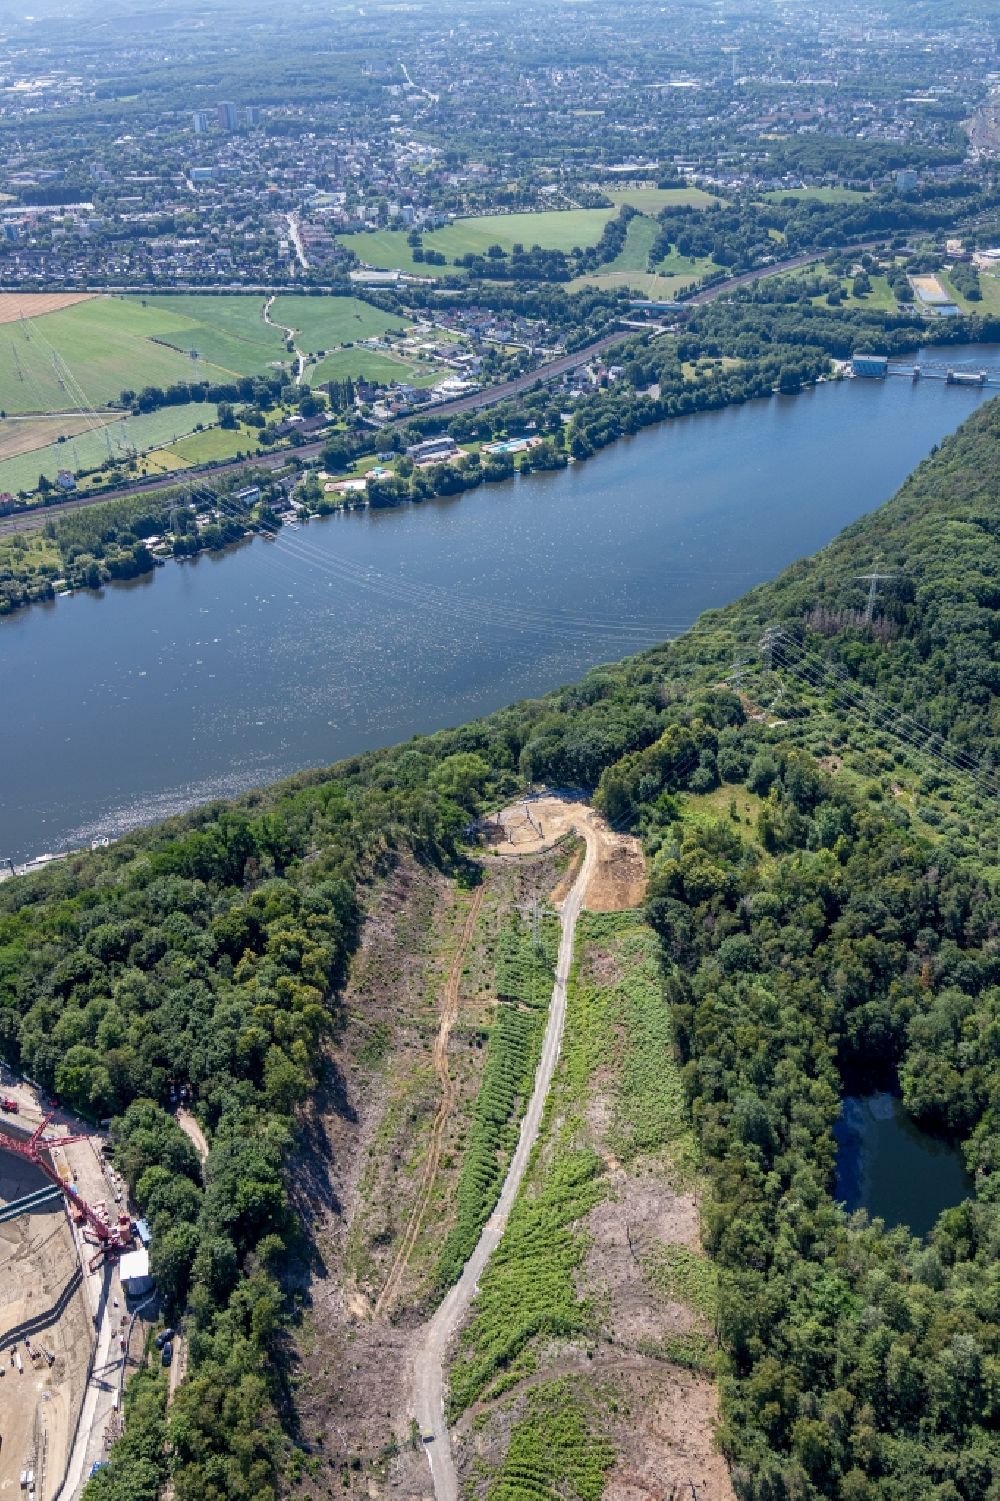 Aerial photograph Herdecke - Construction site of Pumped storage power plant / hydro power plant with energy storage on Hengsteysee in Herdecke in North Rhine-Westphalia